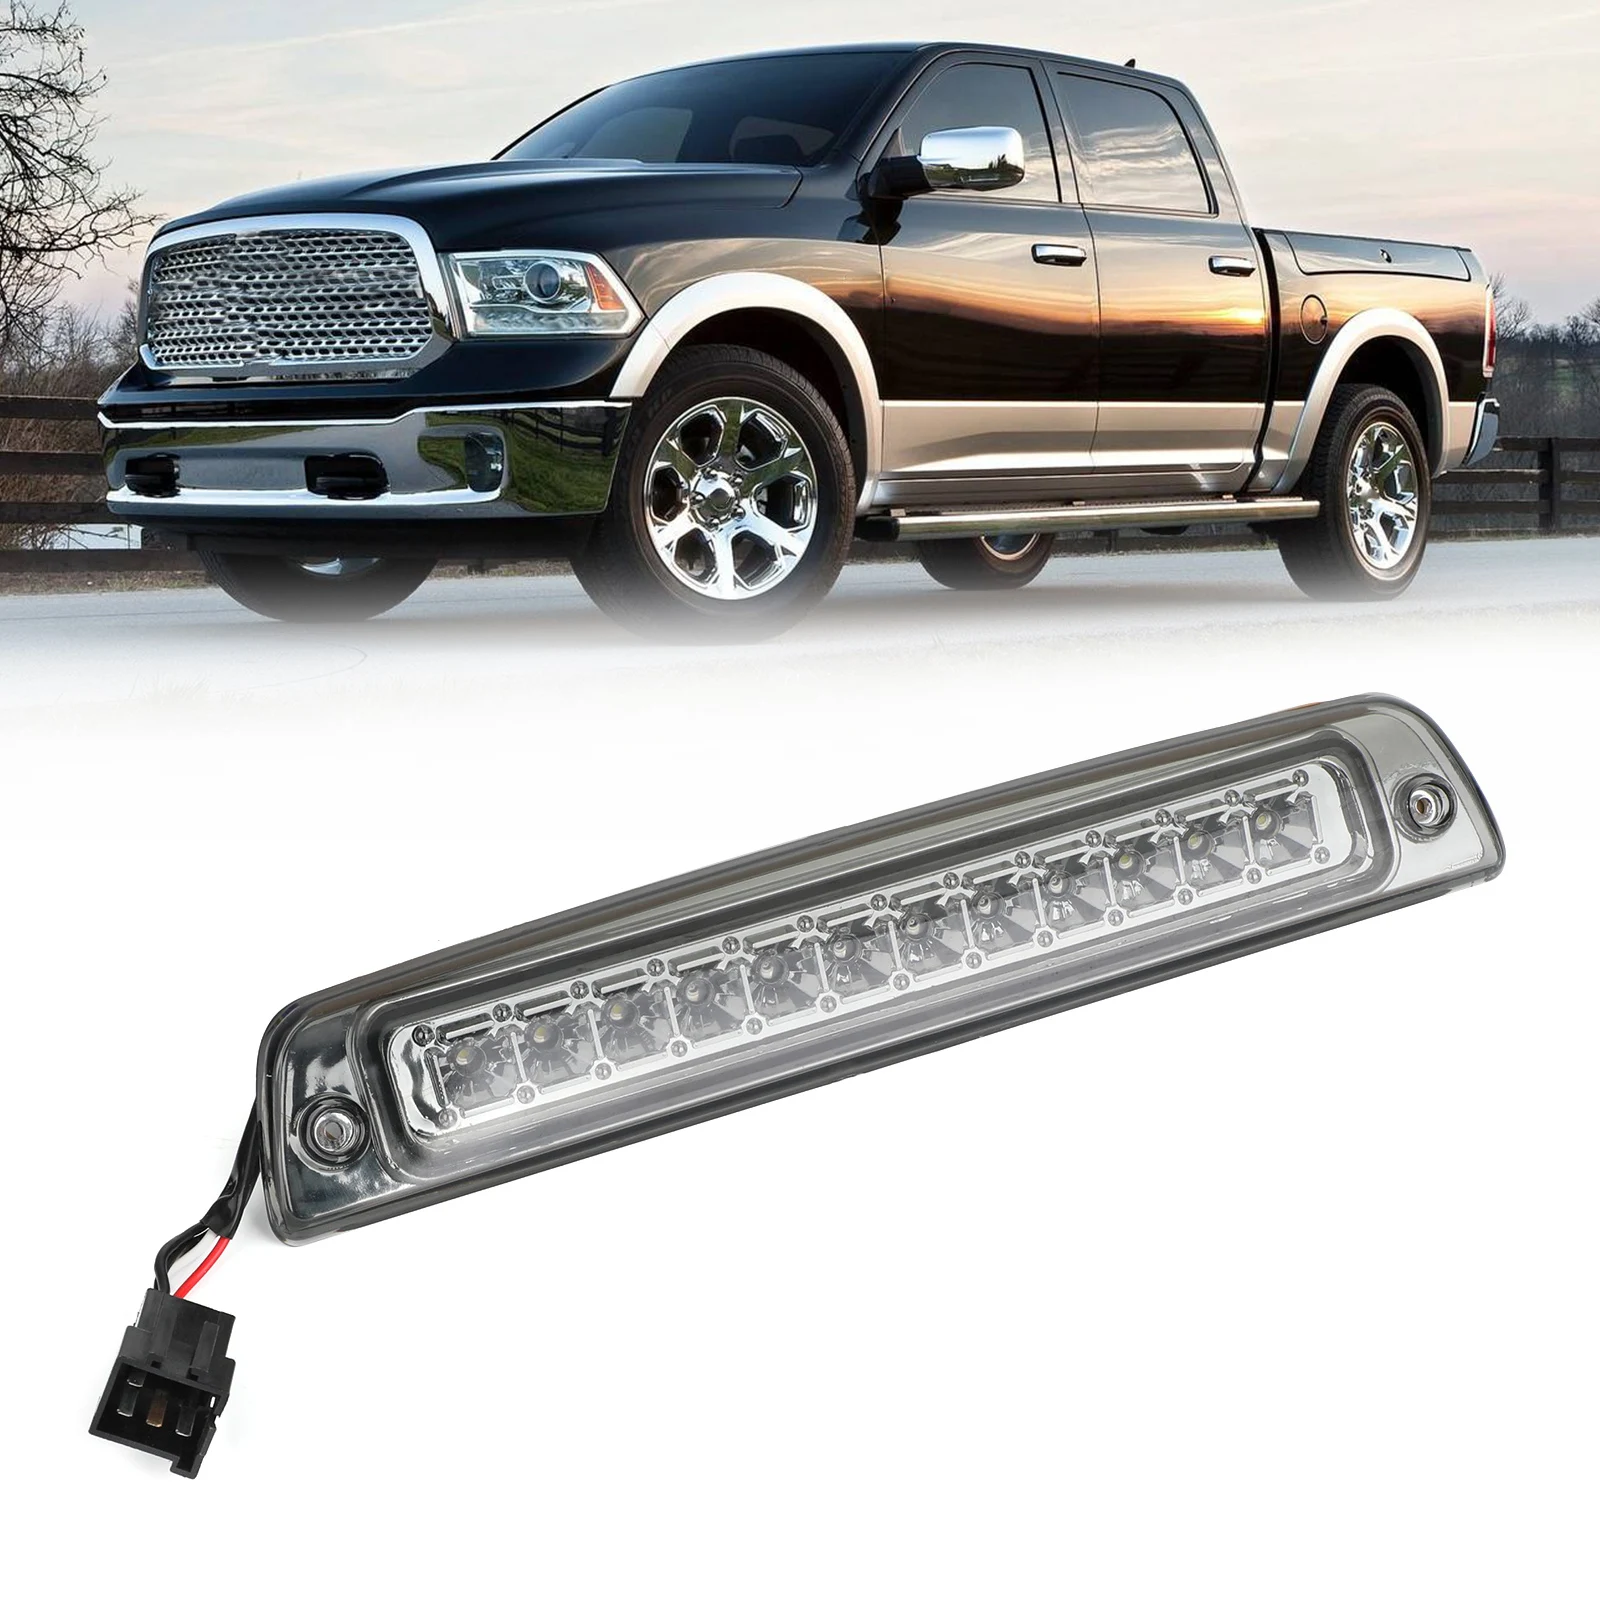 

Areyourshop Fits For Ram 1500/2500/3500 1994 95 96 97 98 99 00 2001 LED Third 3RD Tail Brake Light Stop Lamp Black, As shown in the picture